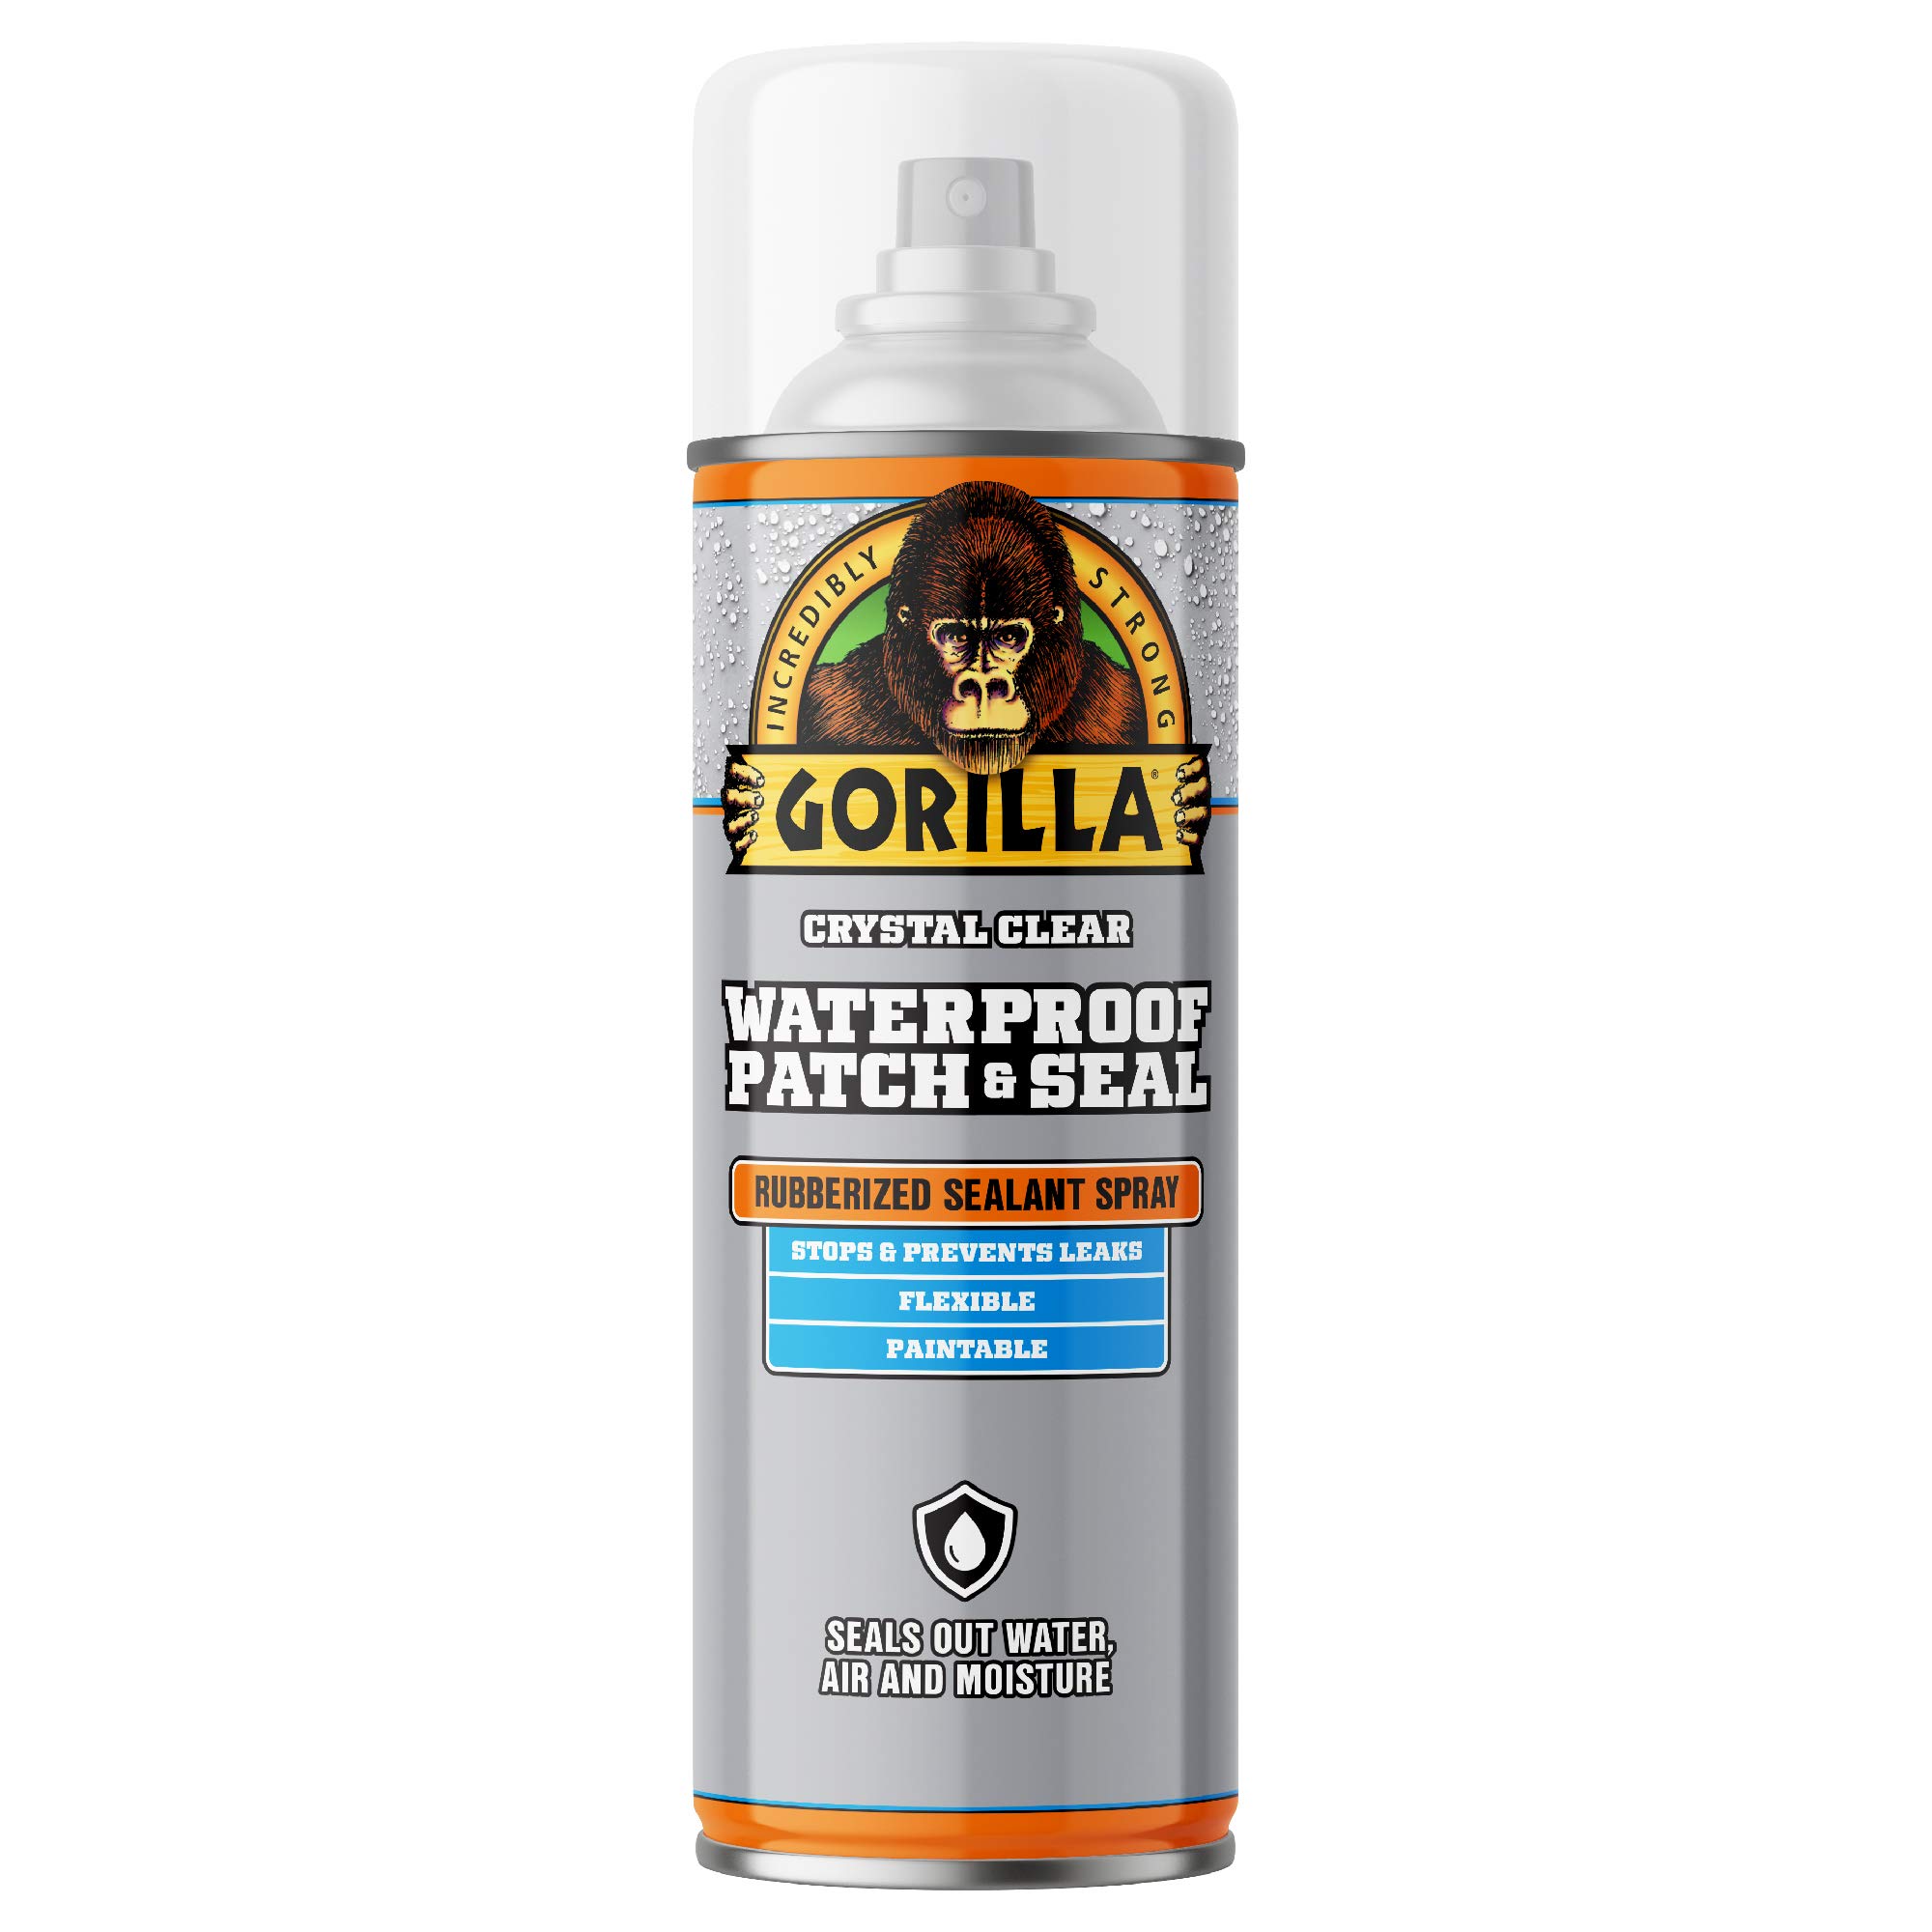 Gorilla Waterproof Patch & Seal Spray, Clear, 14 Ounces, 1 Pack